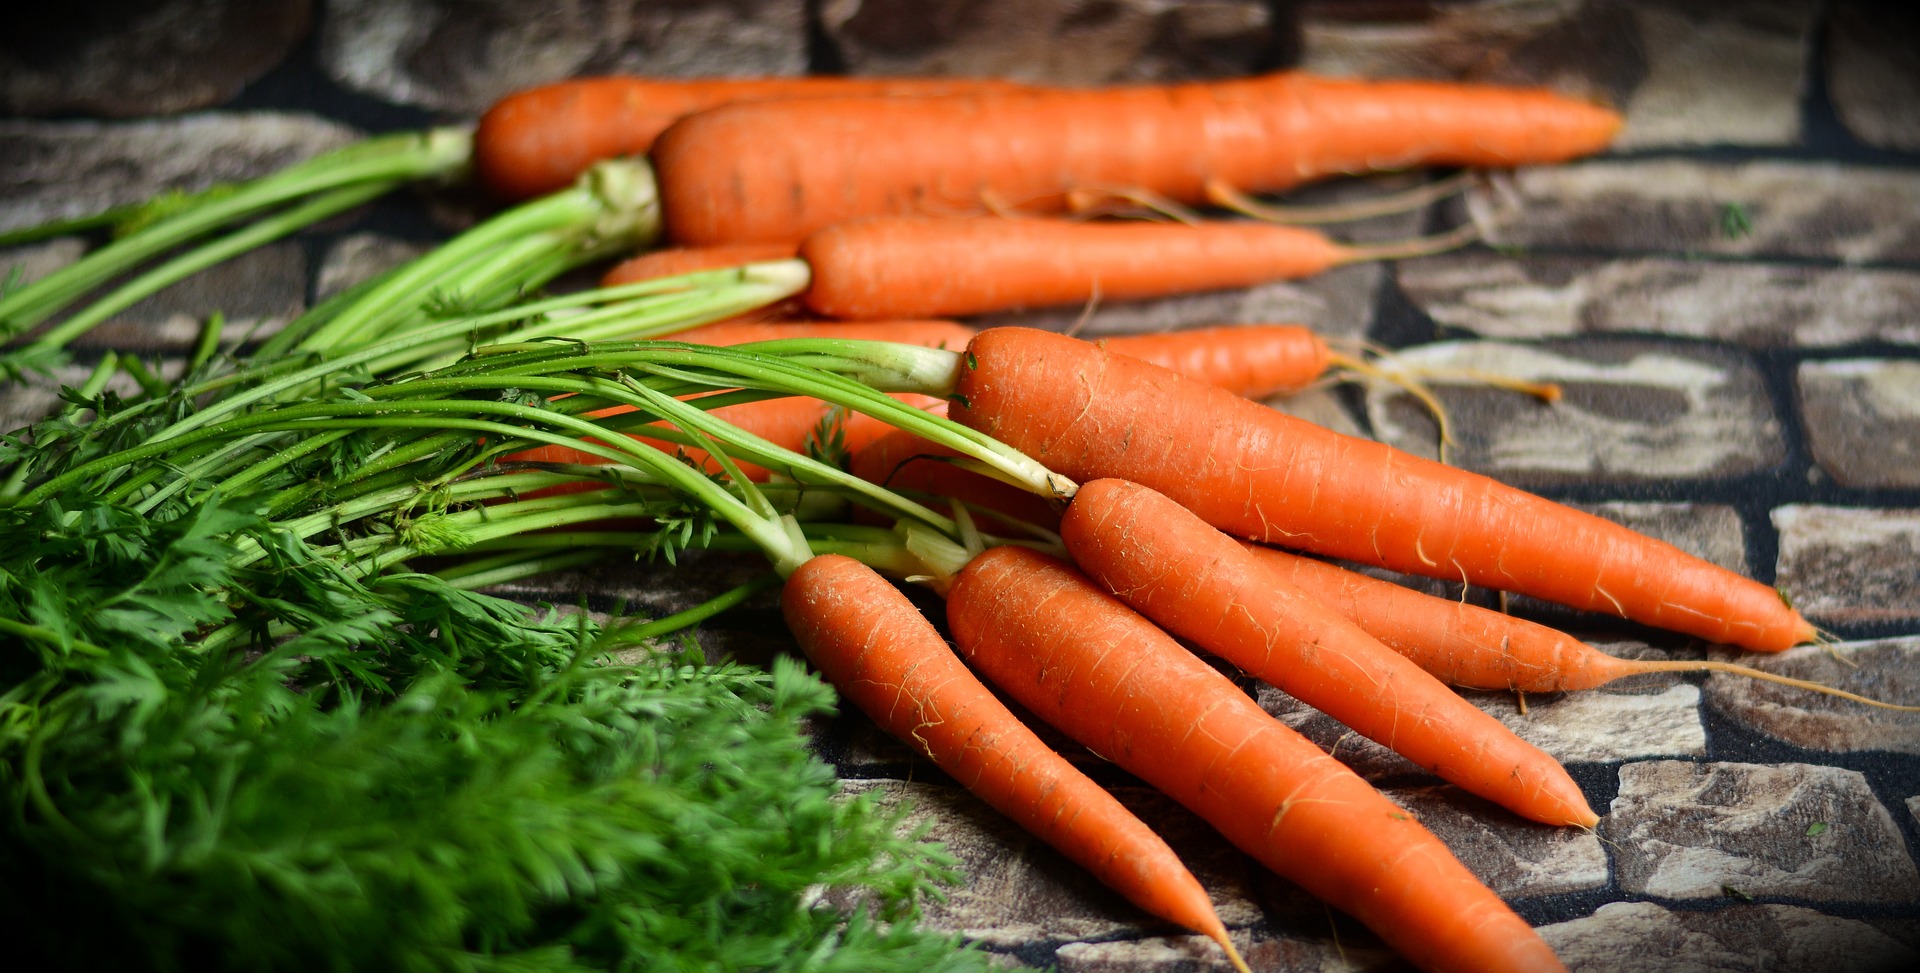 10 Carrot Benefits and Side Effects